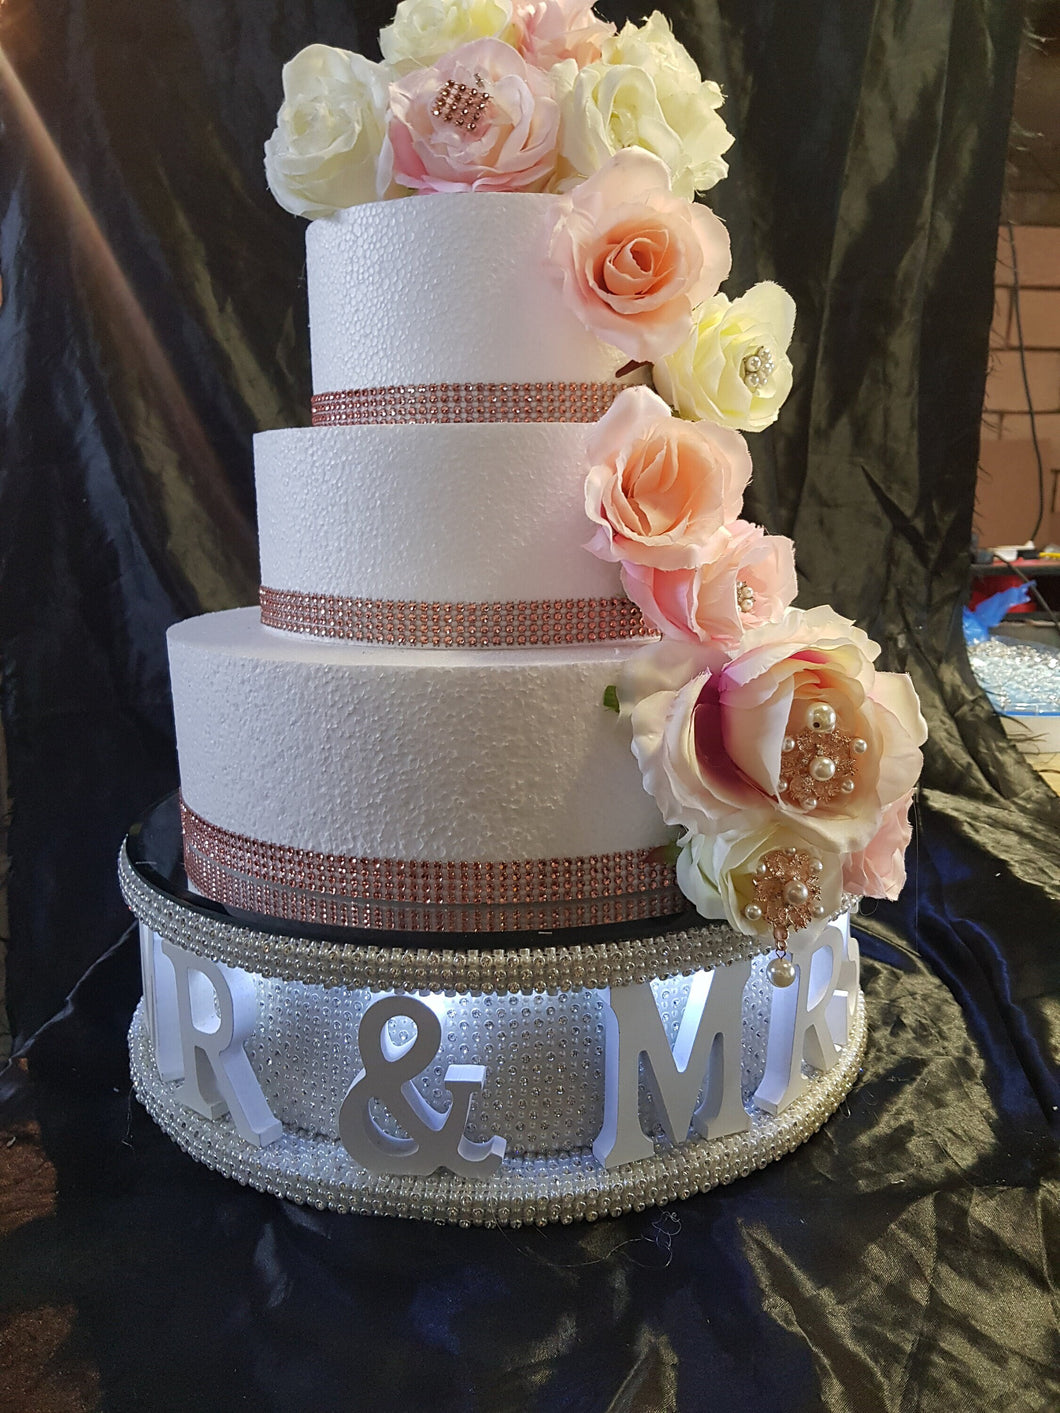 Mr & Mrs cake stand-Pearl and REAL CRYSTAL stones. wedding cake stand + lights + personalised by Crystal wedding uk